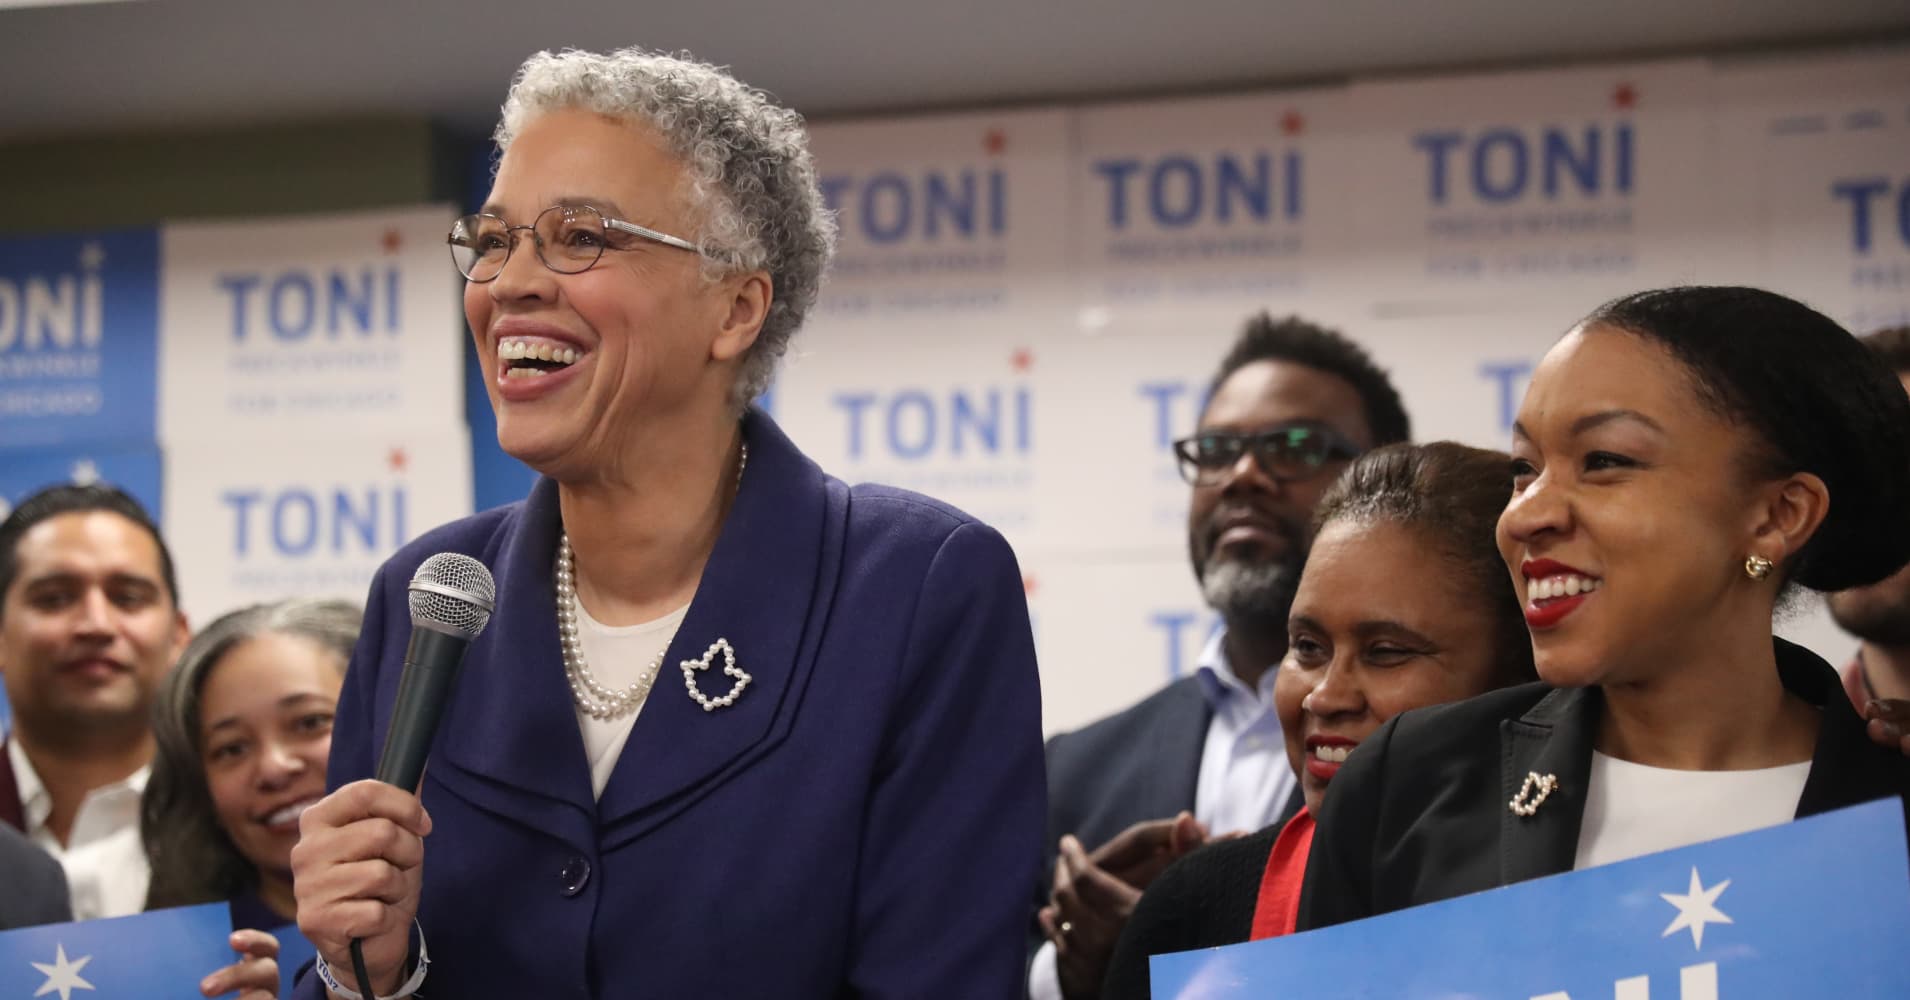 Chicago will elect first black female mayor in runoff election